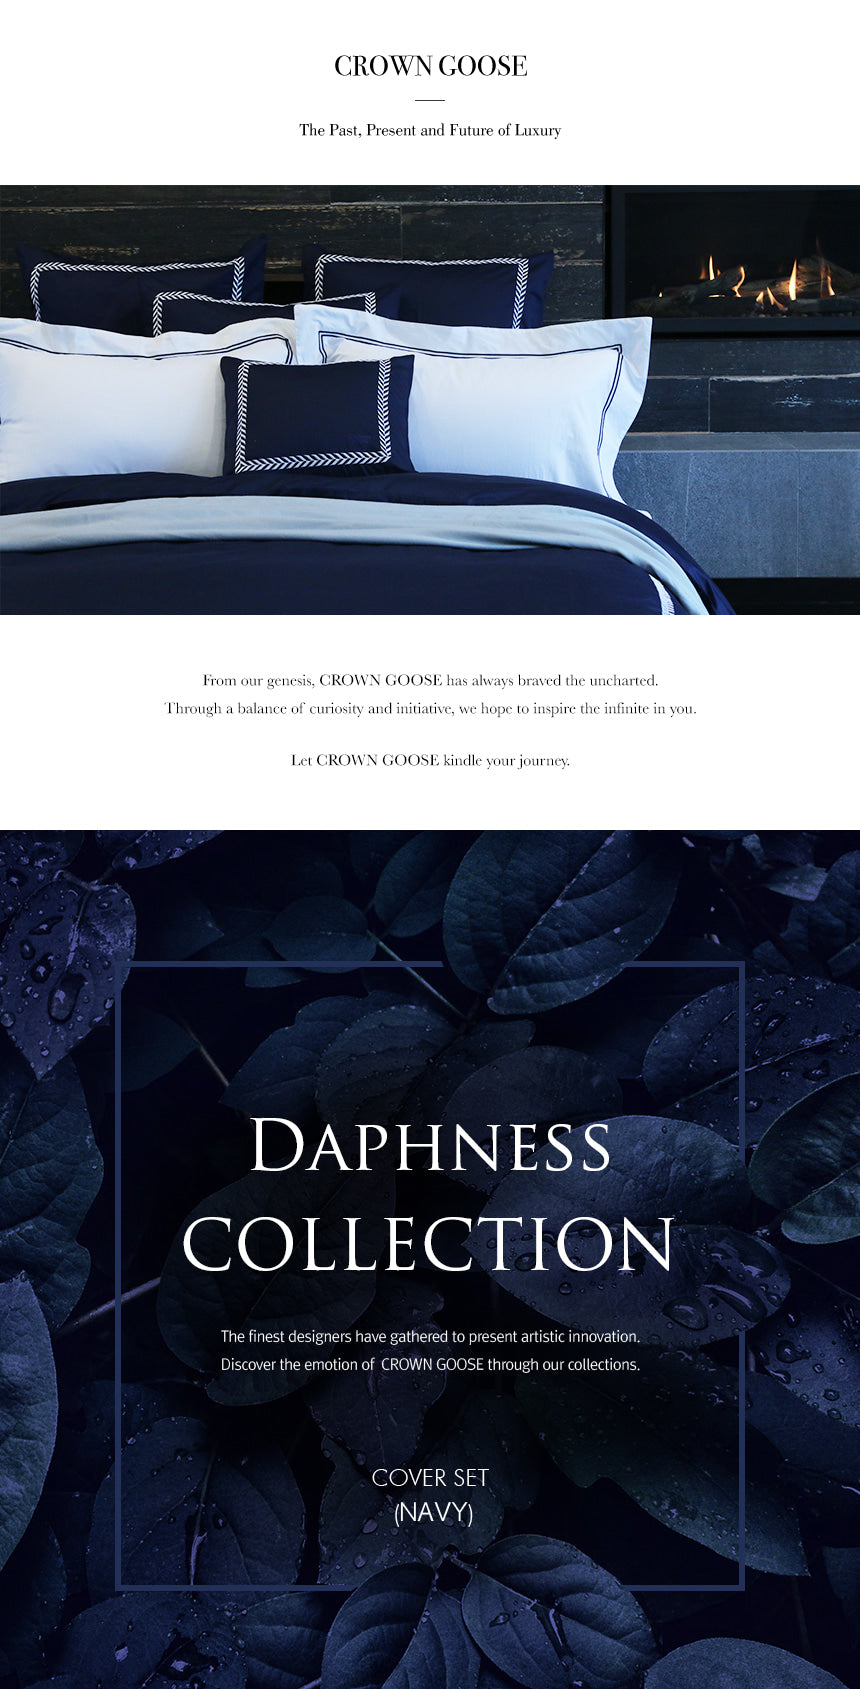 Duvet Cover Set Daphness Collection, Navy